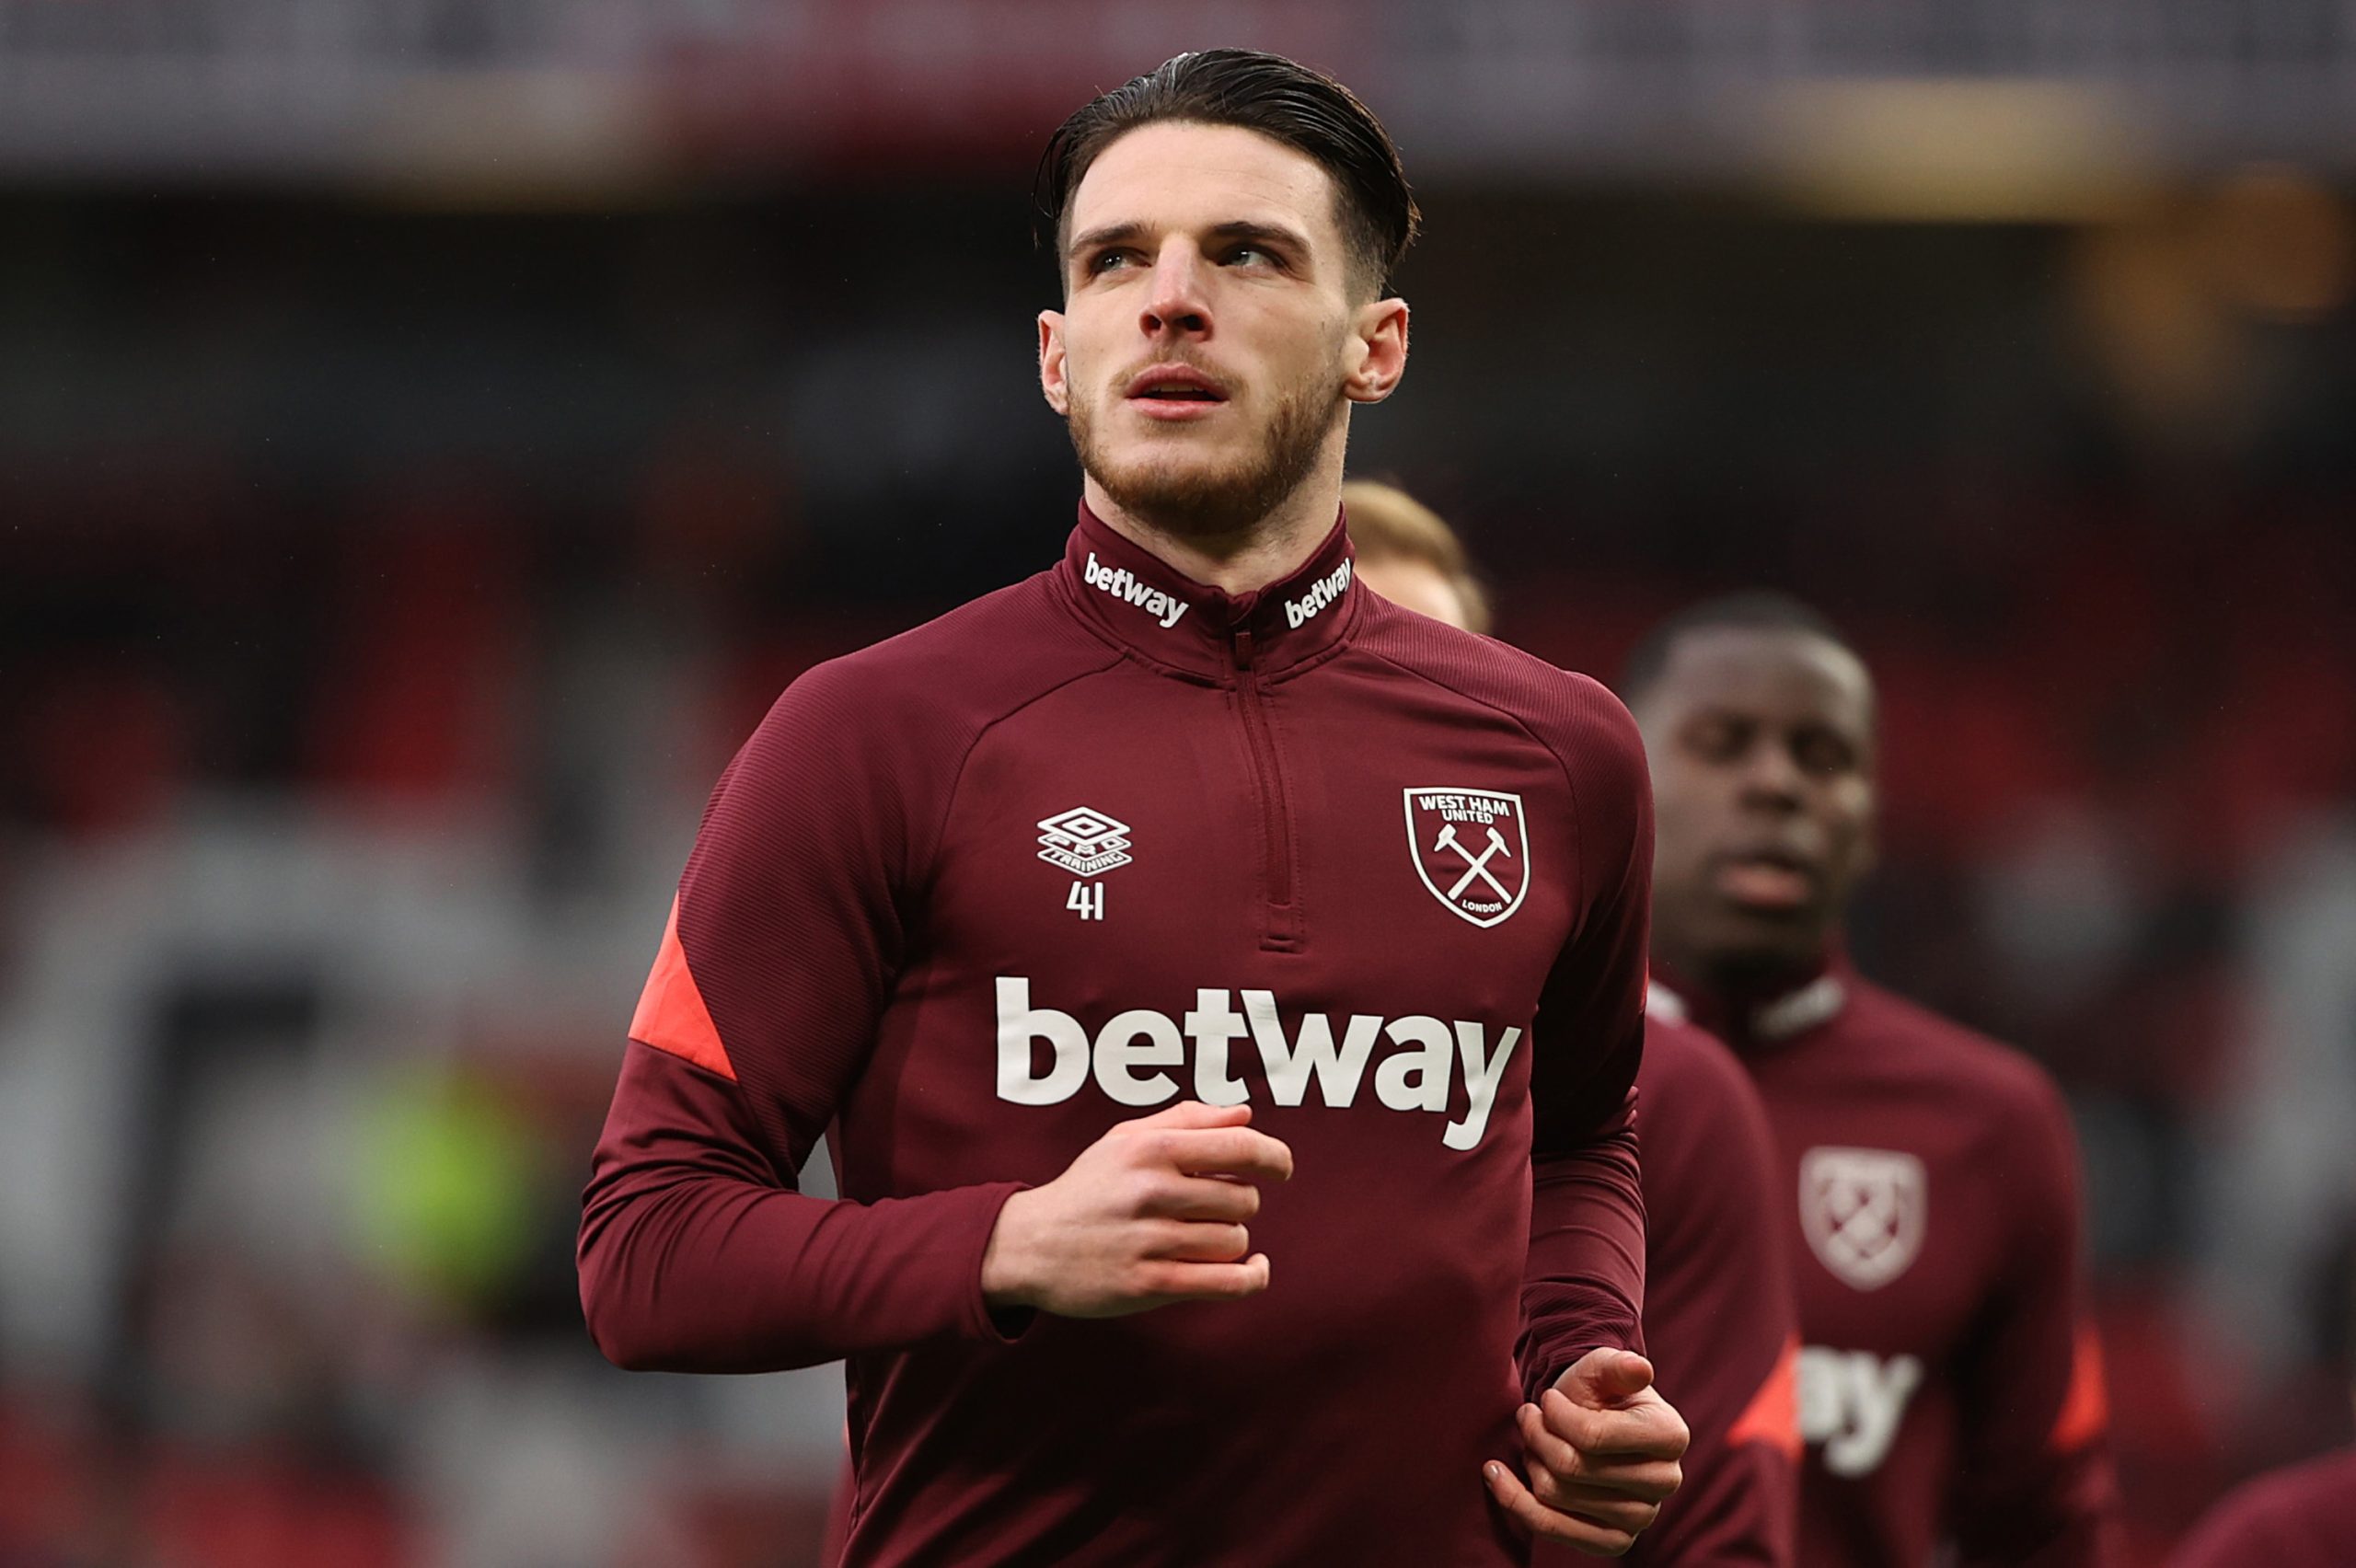 Fabrizio Romano confirms Arsenal have reached an agreement with West Ham United to sign Chelsea target Declan Rice.